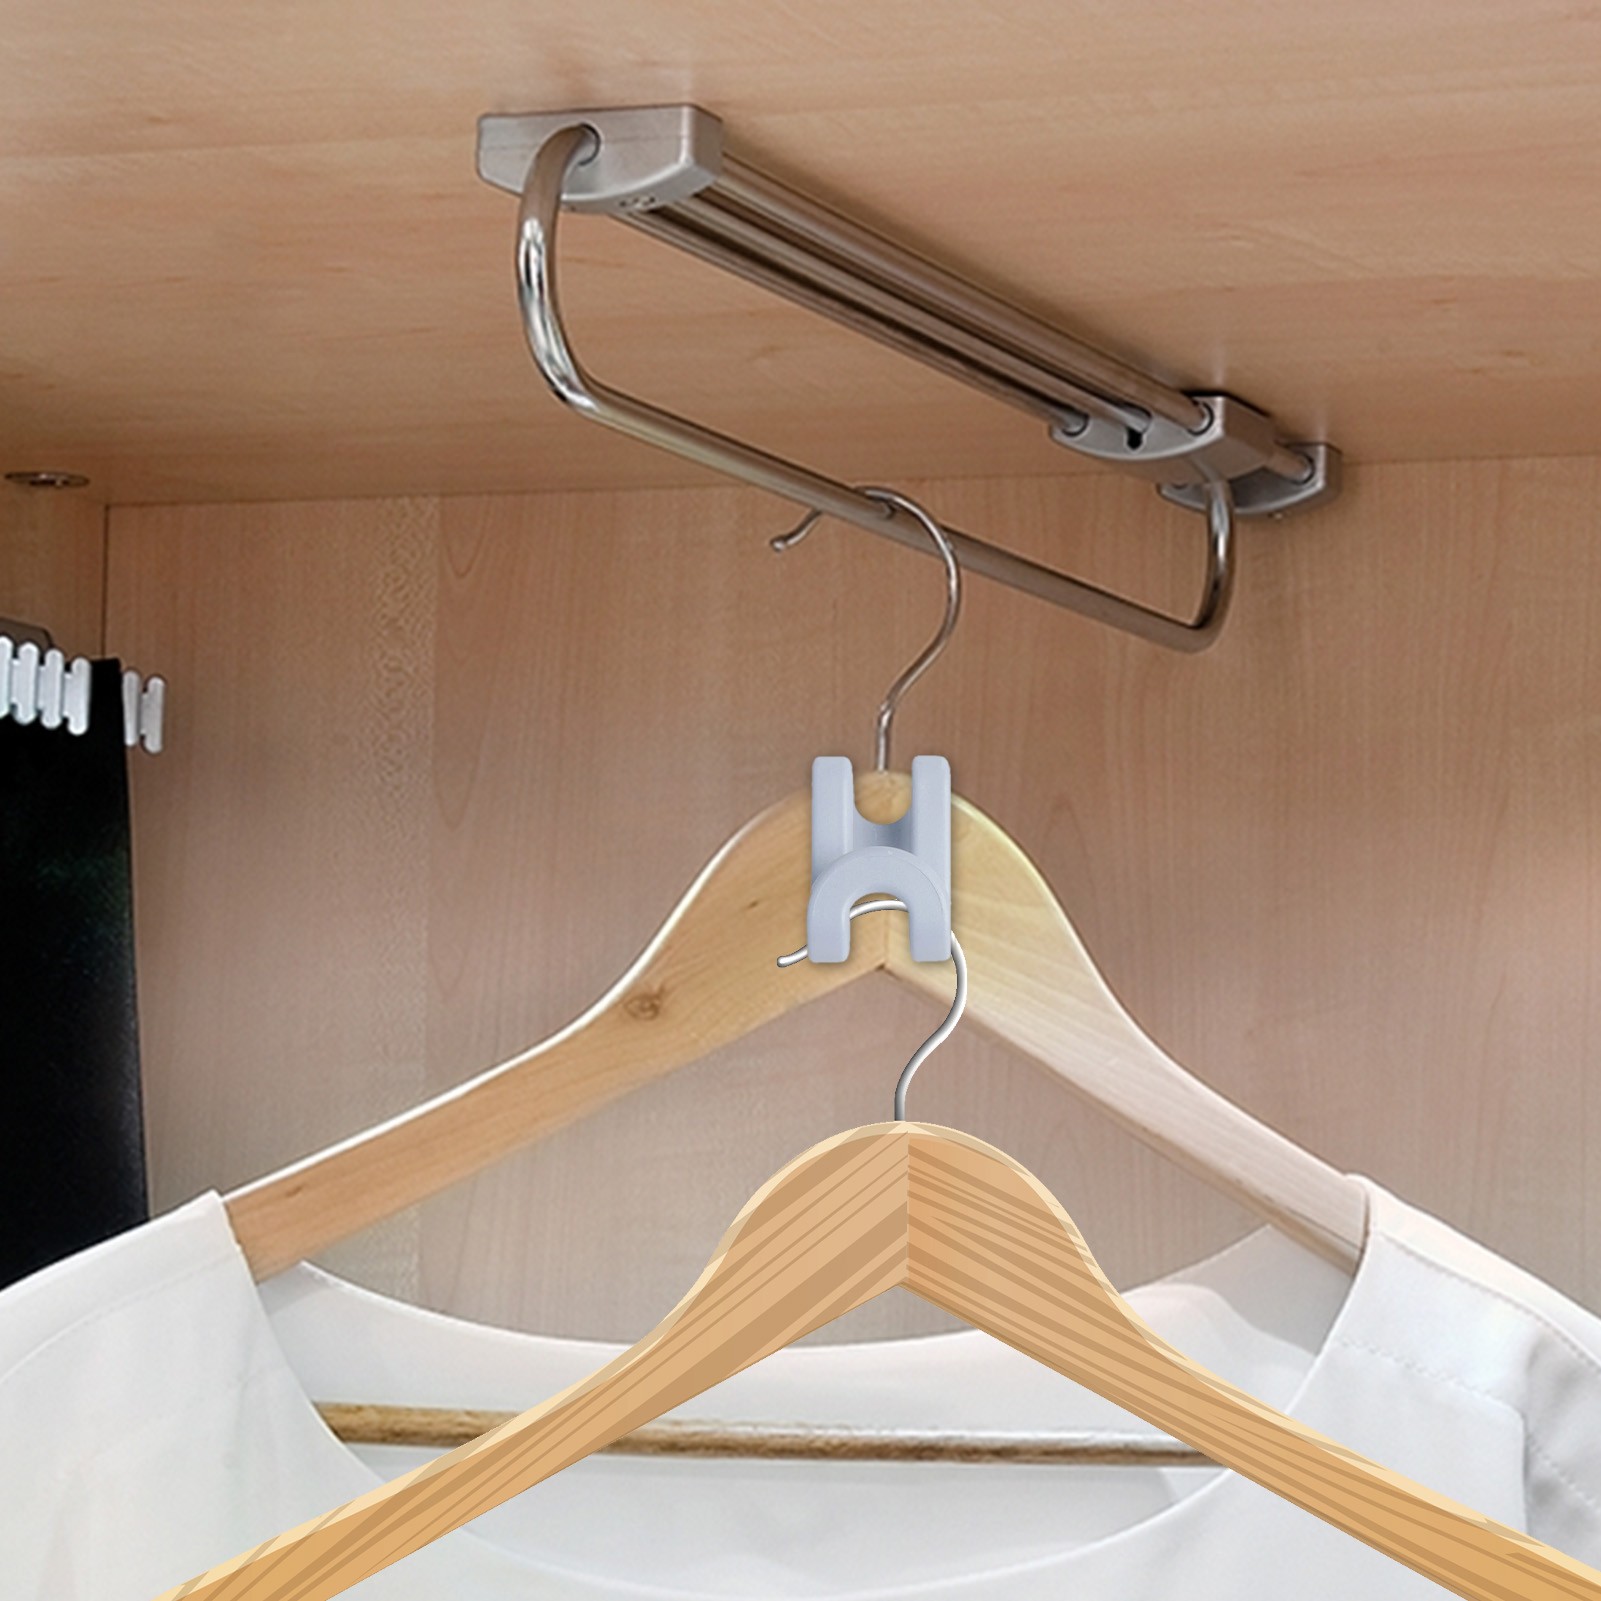 Clothes Hanger Hook Connector Clothes Hanger Clips Extender Space Saving Practical Cascading Connection Hooks for Hanging Clothes Wardrobe